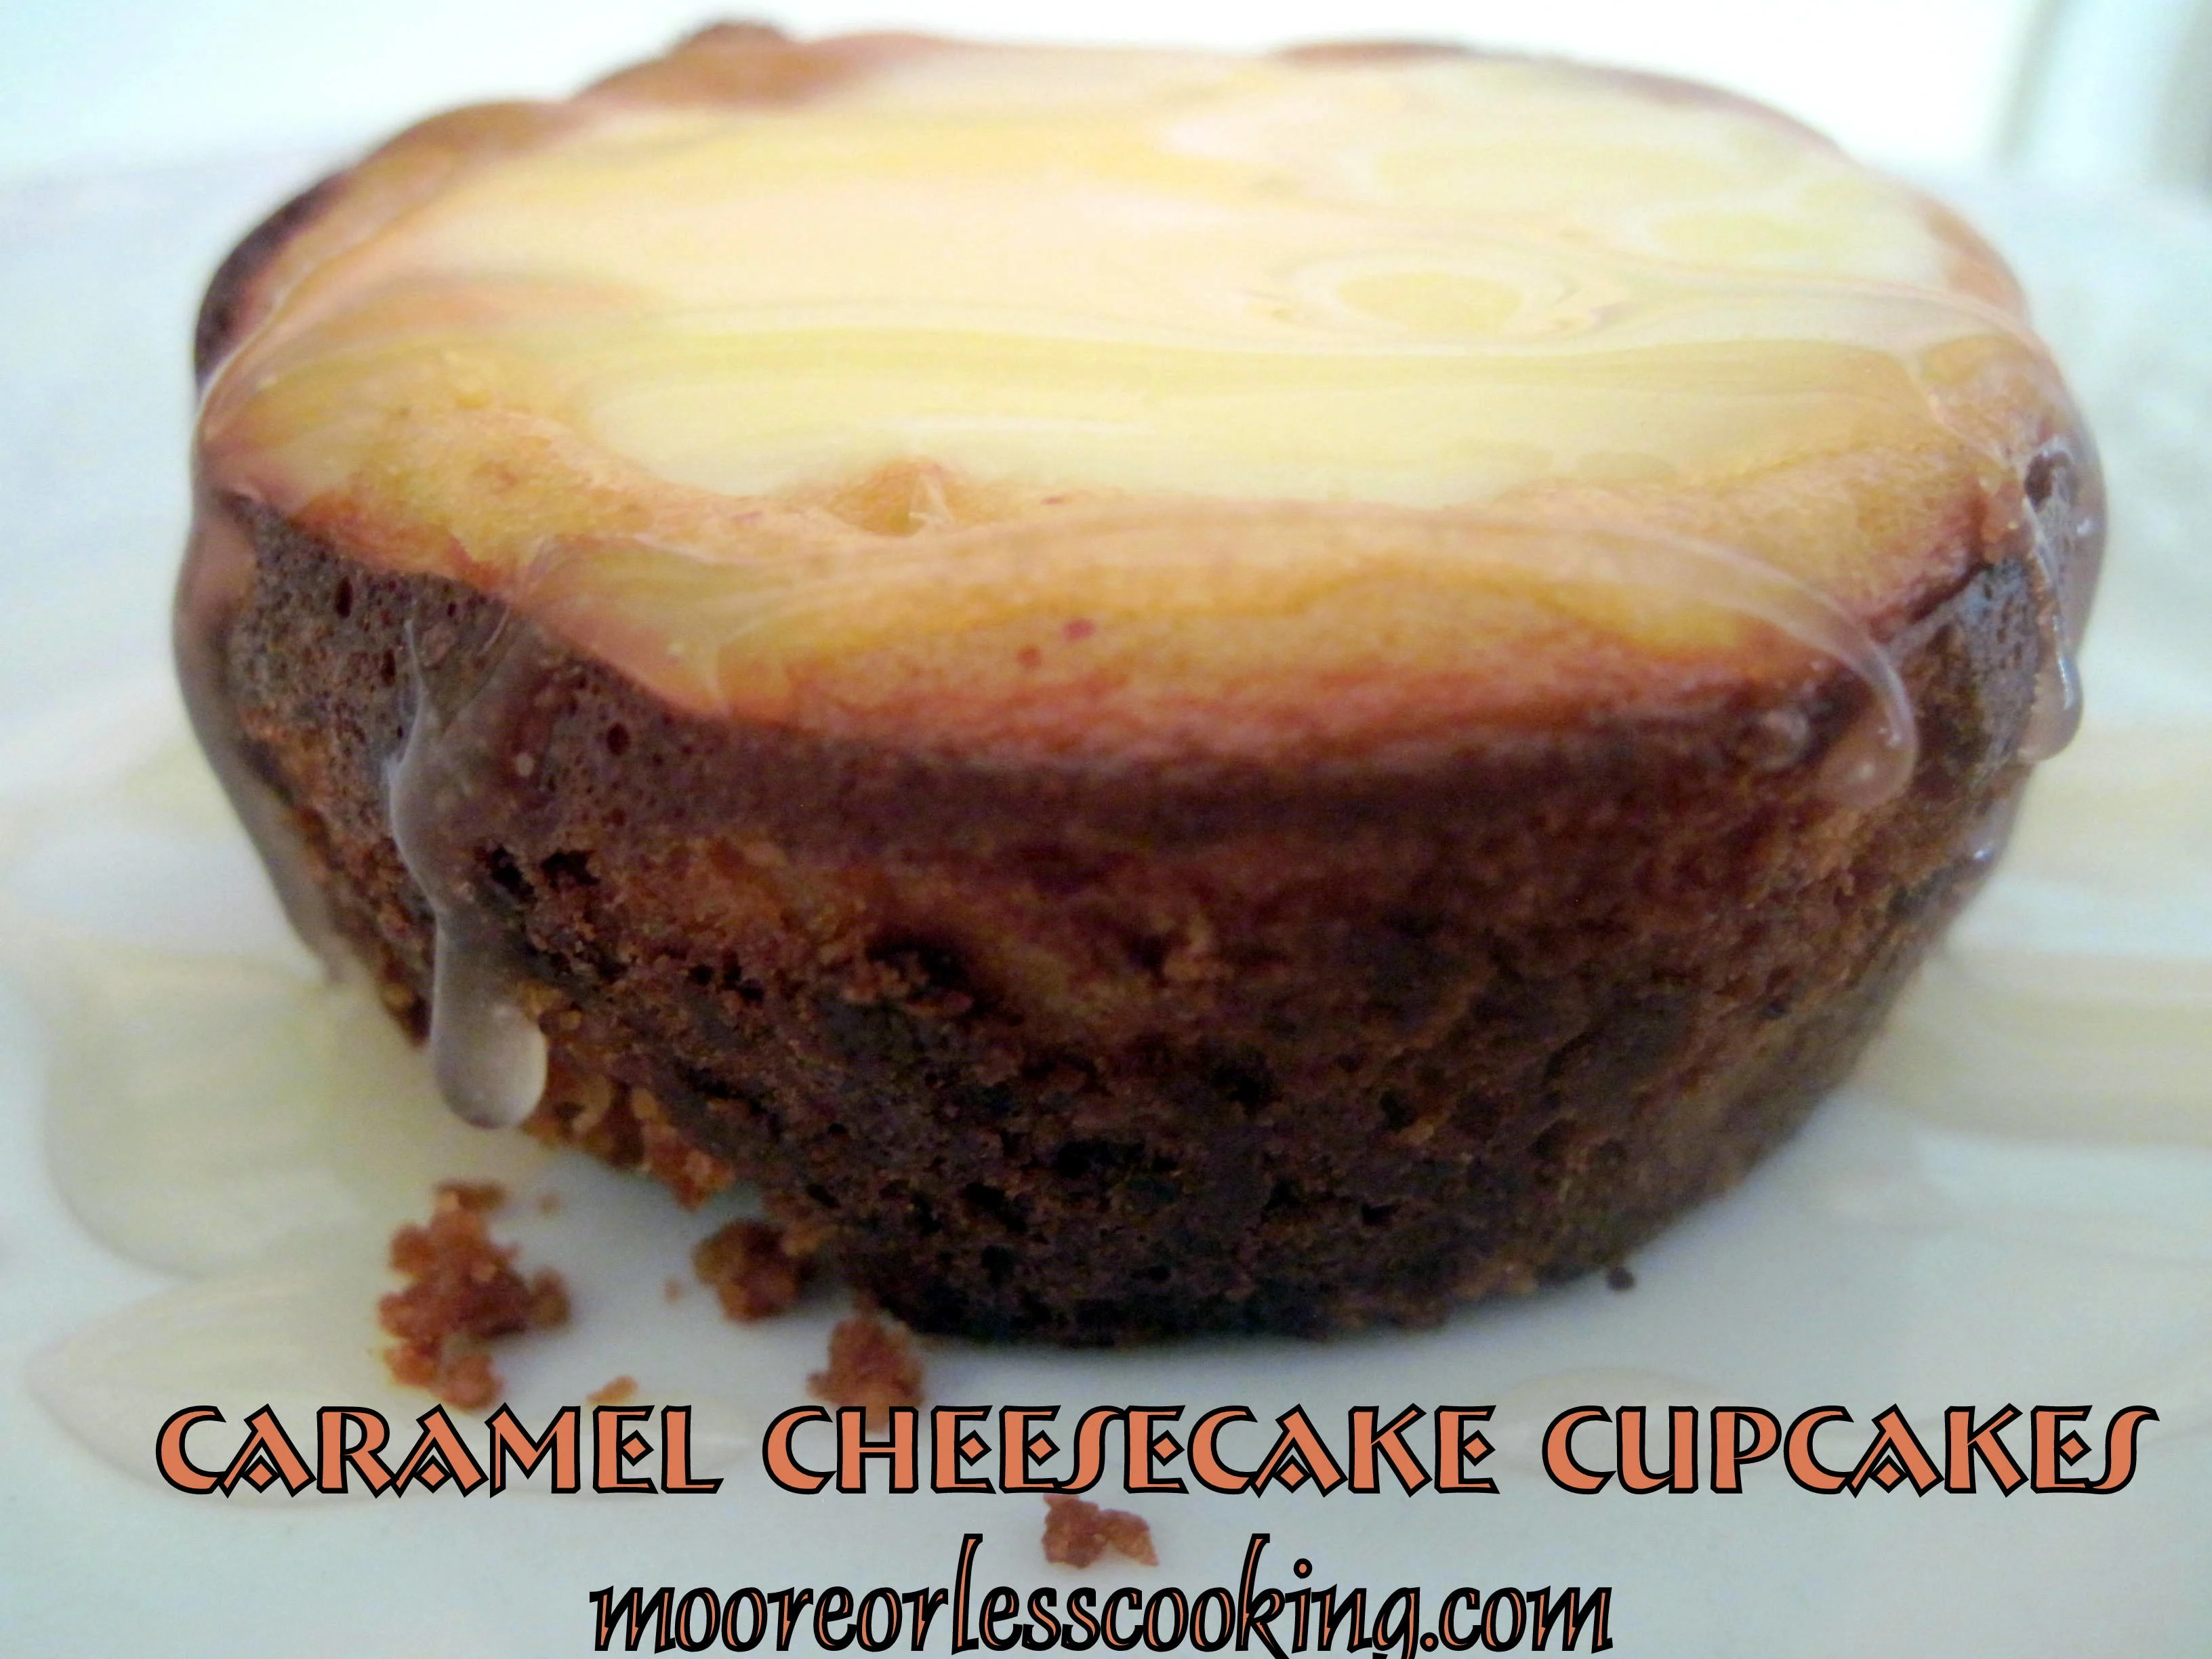 Caramel Cheesecake Cupcakes and a Cookbook GIVEAWAY!!